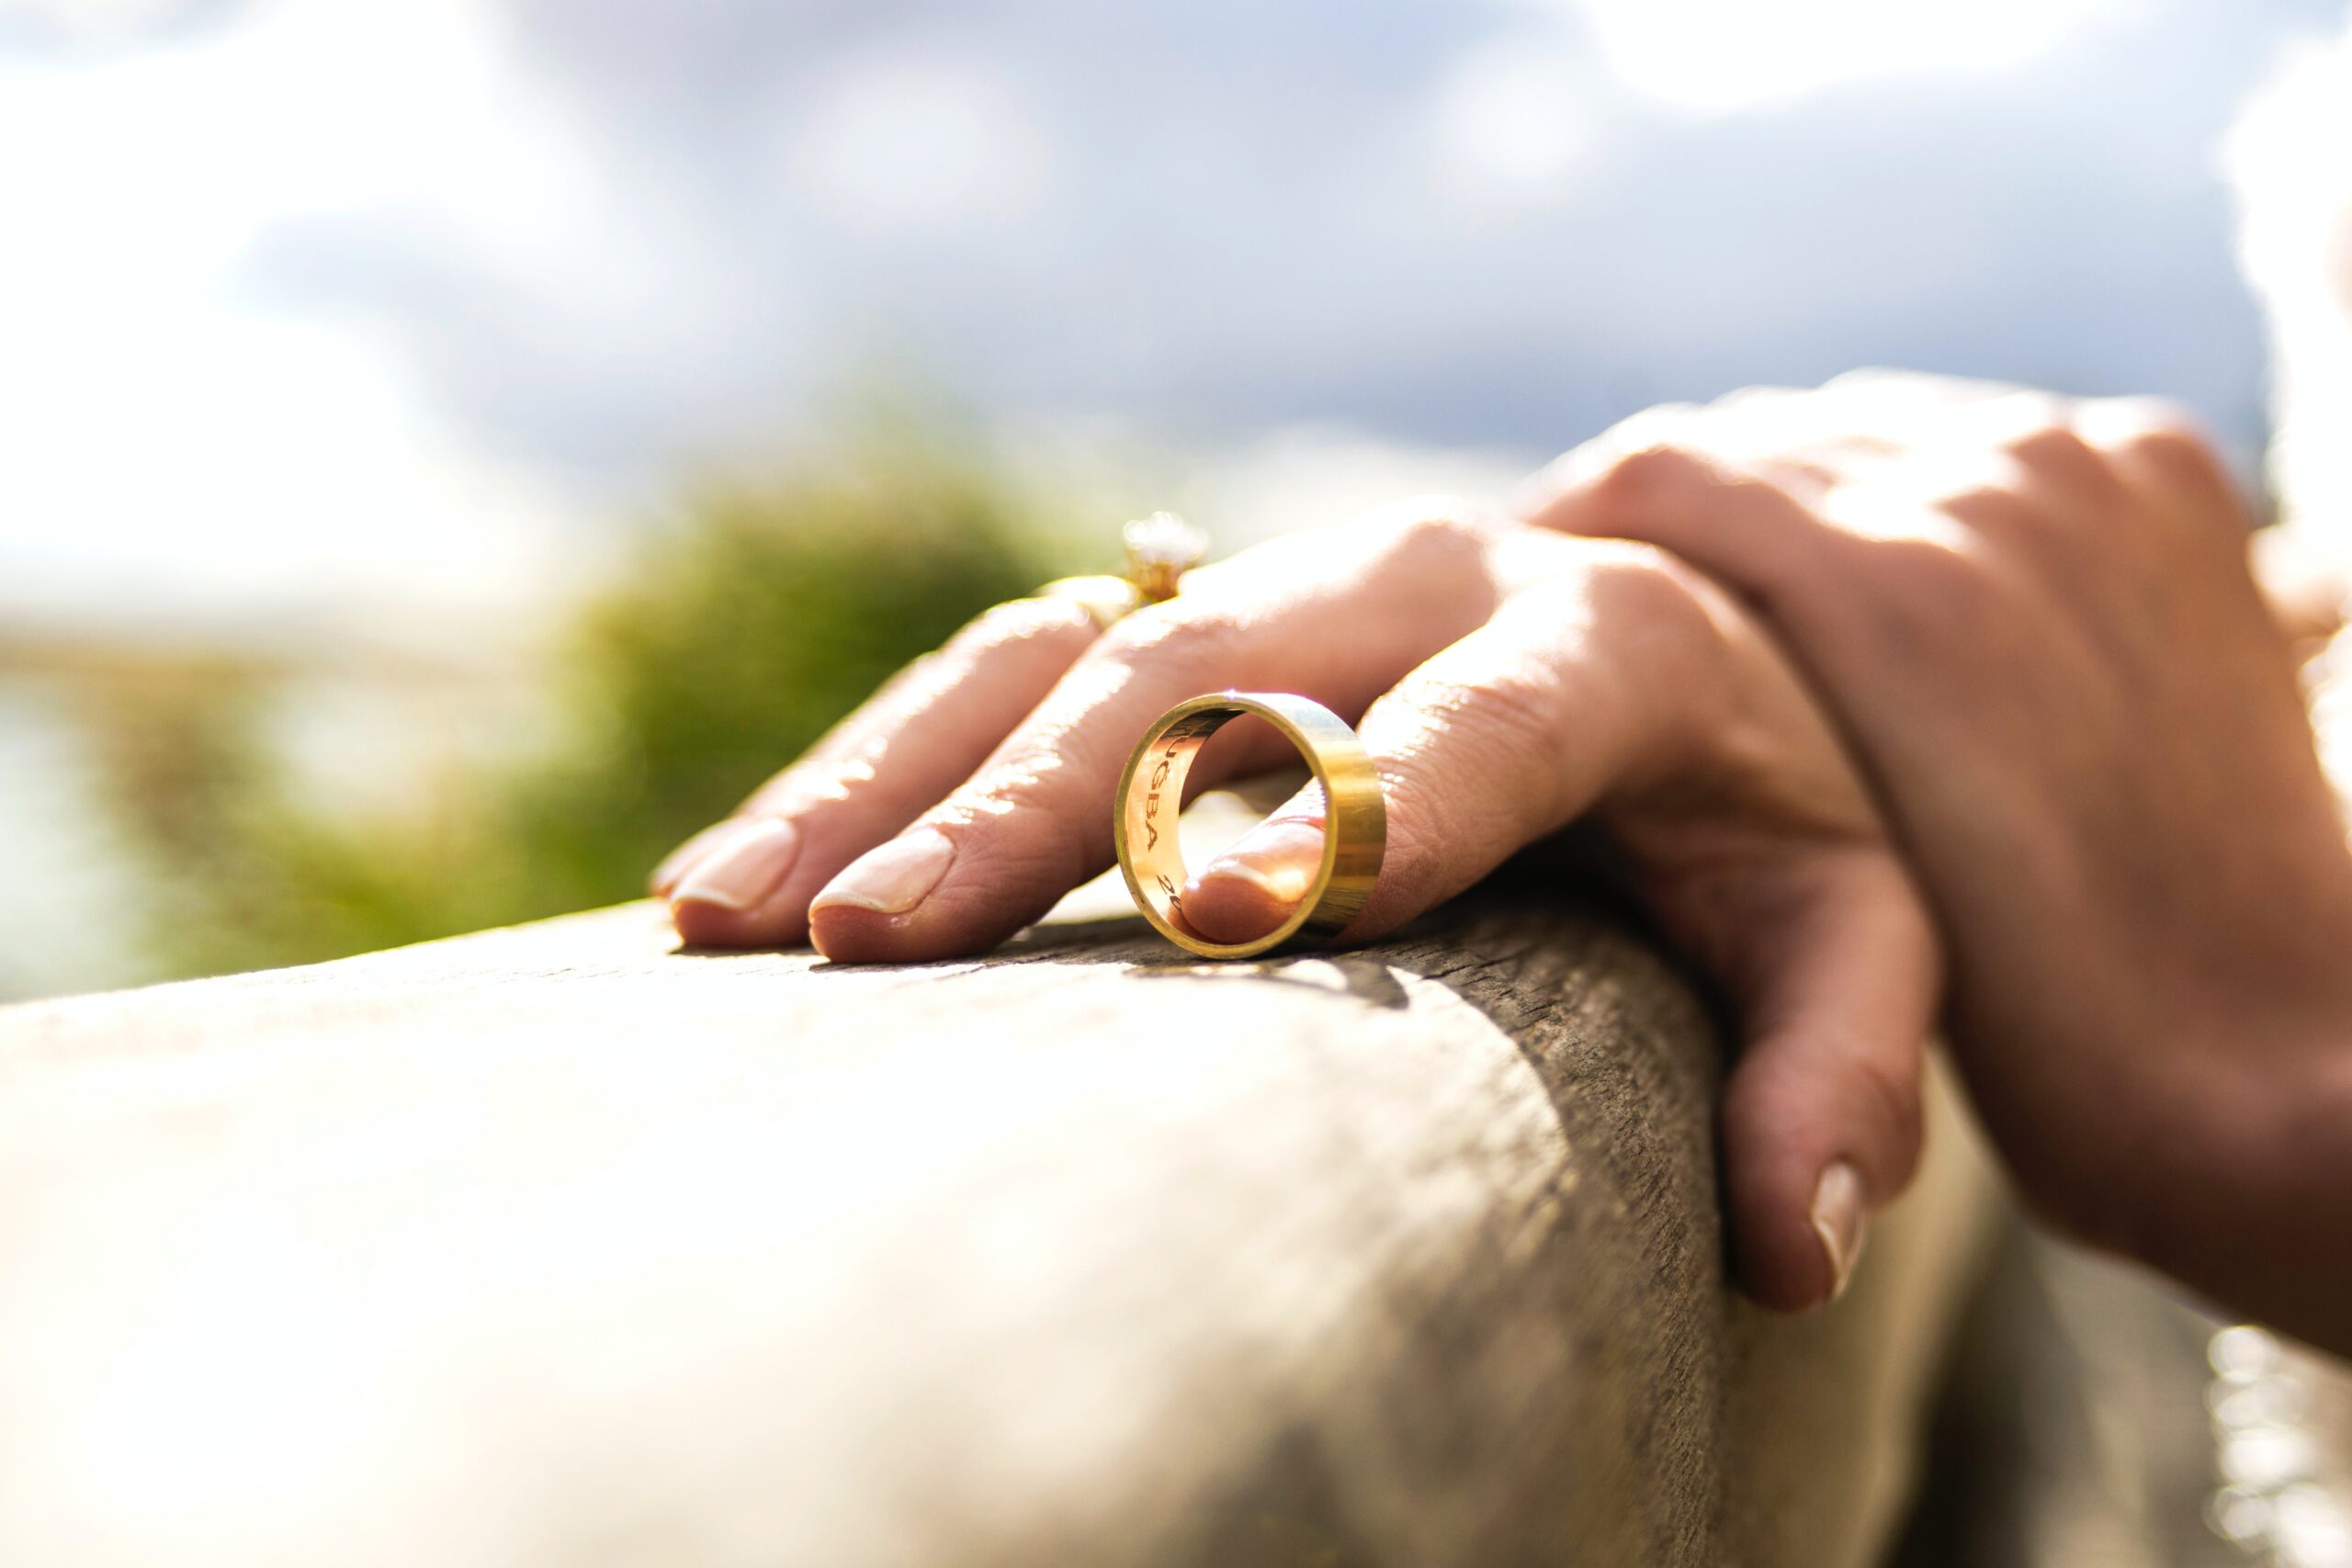 removed wedding ring - what to do when spouse asks for divorce